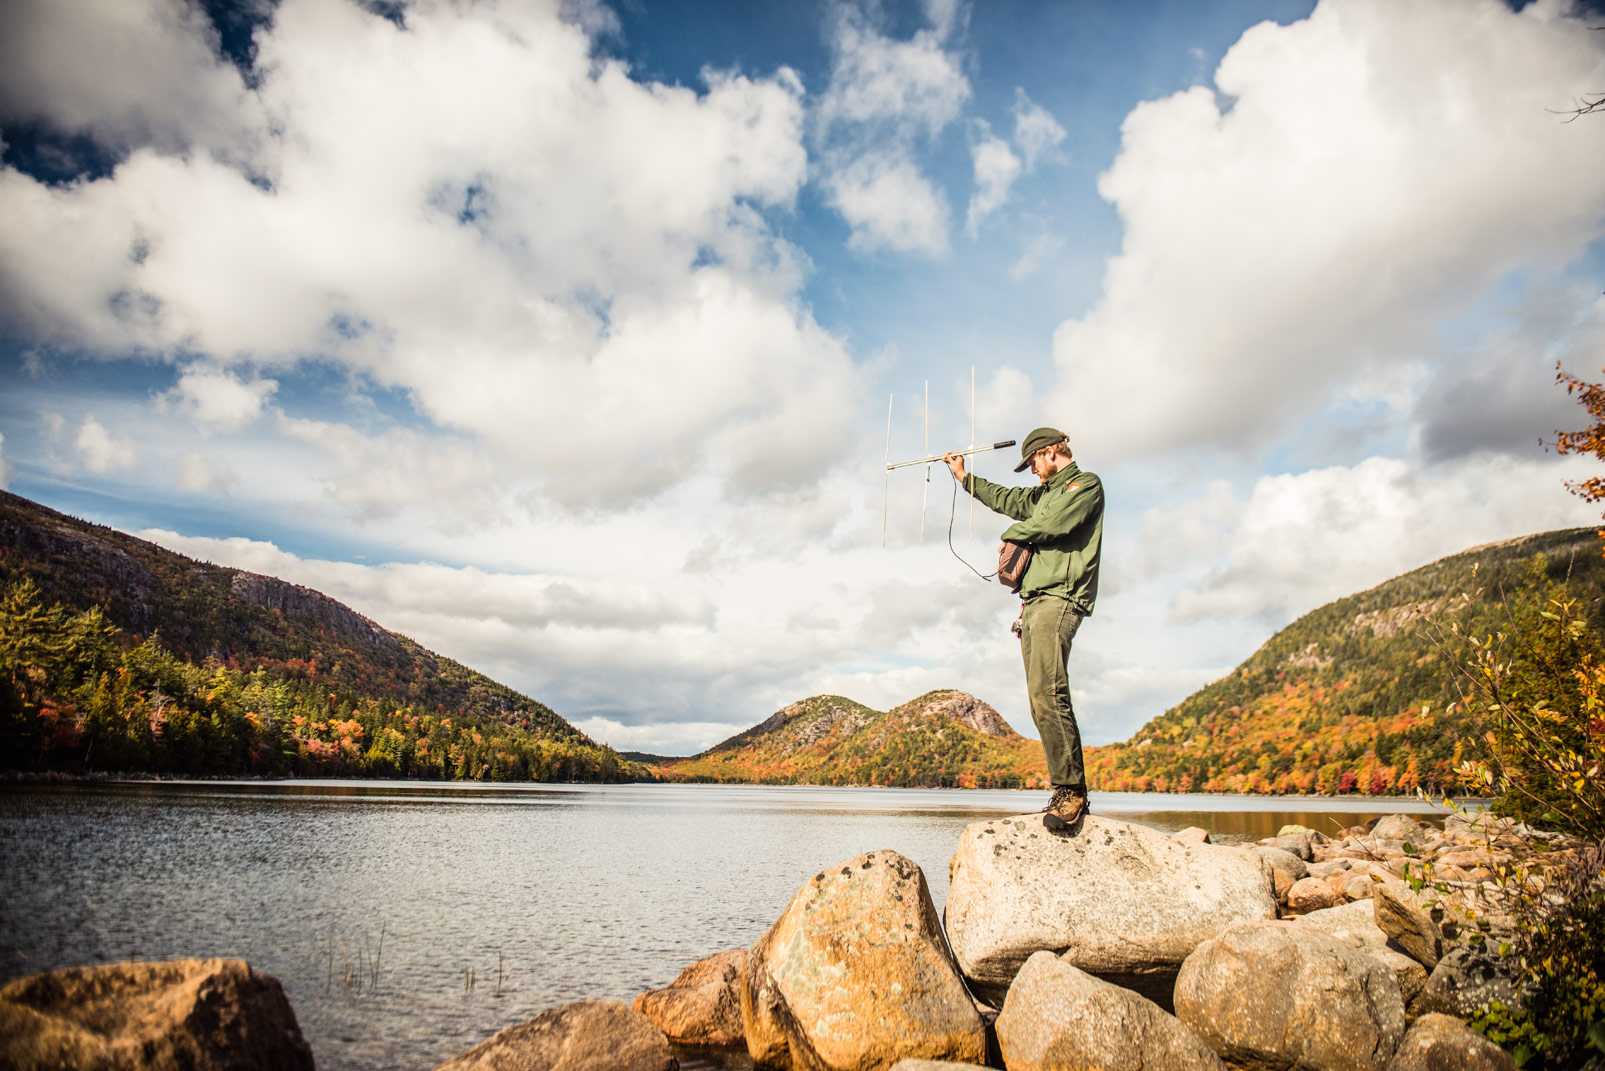 An Acadia park ranger monitors bats at Jordan Pond with a remote transmission system. Acadia was the first park to emerge from private citizens’ land donations after a group of year-round Maine residents and summer vacation-goers contributed land that led to the park’s creation. Photo © Nick Hall